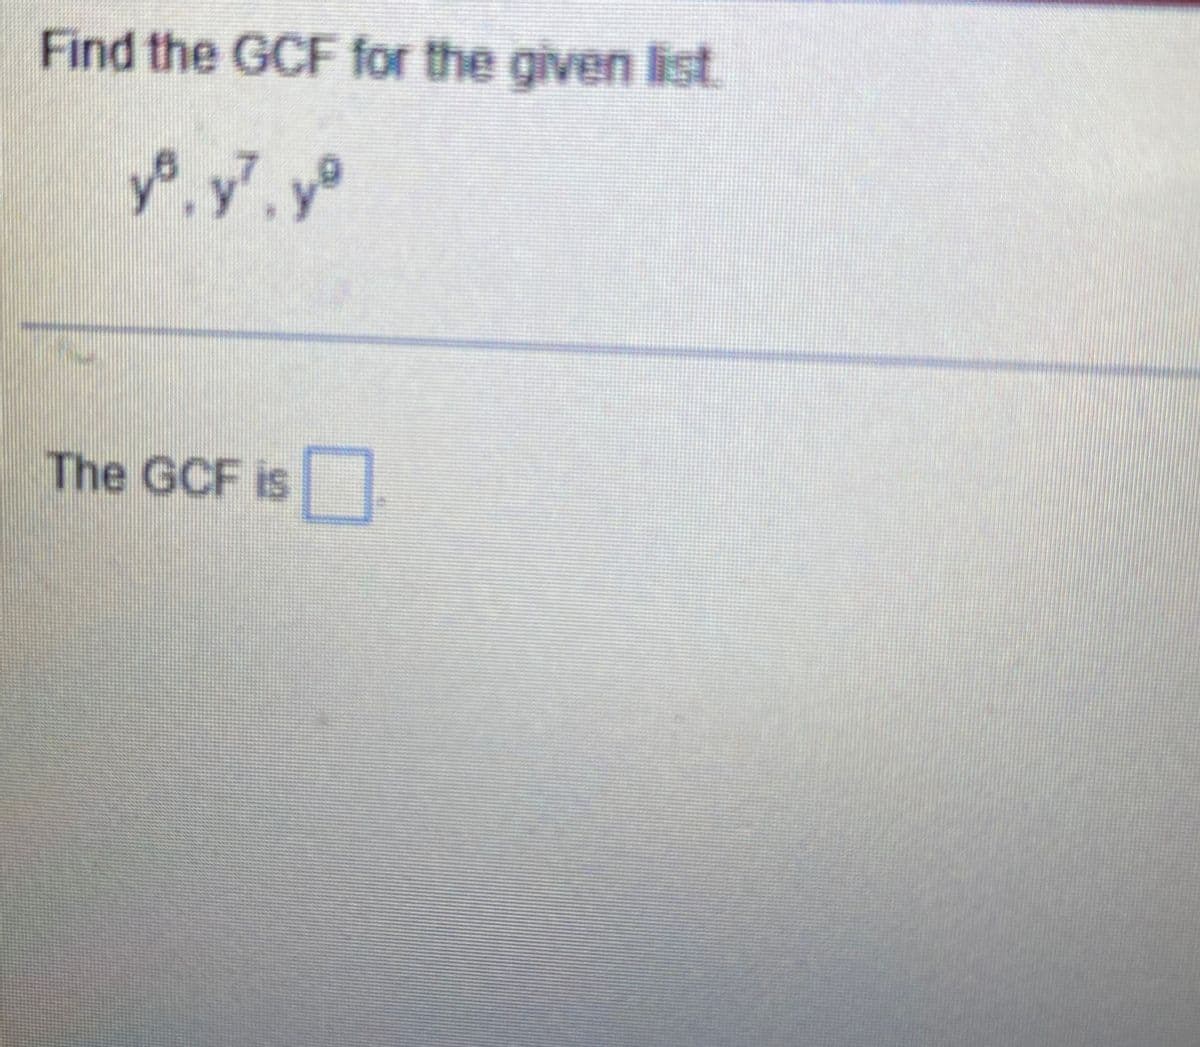 Find the GCF for the given list.
yo. y. yᵒ
The GCF is